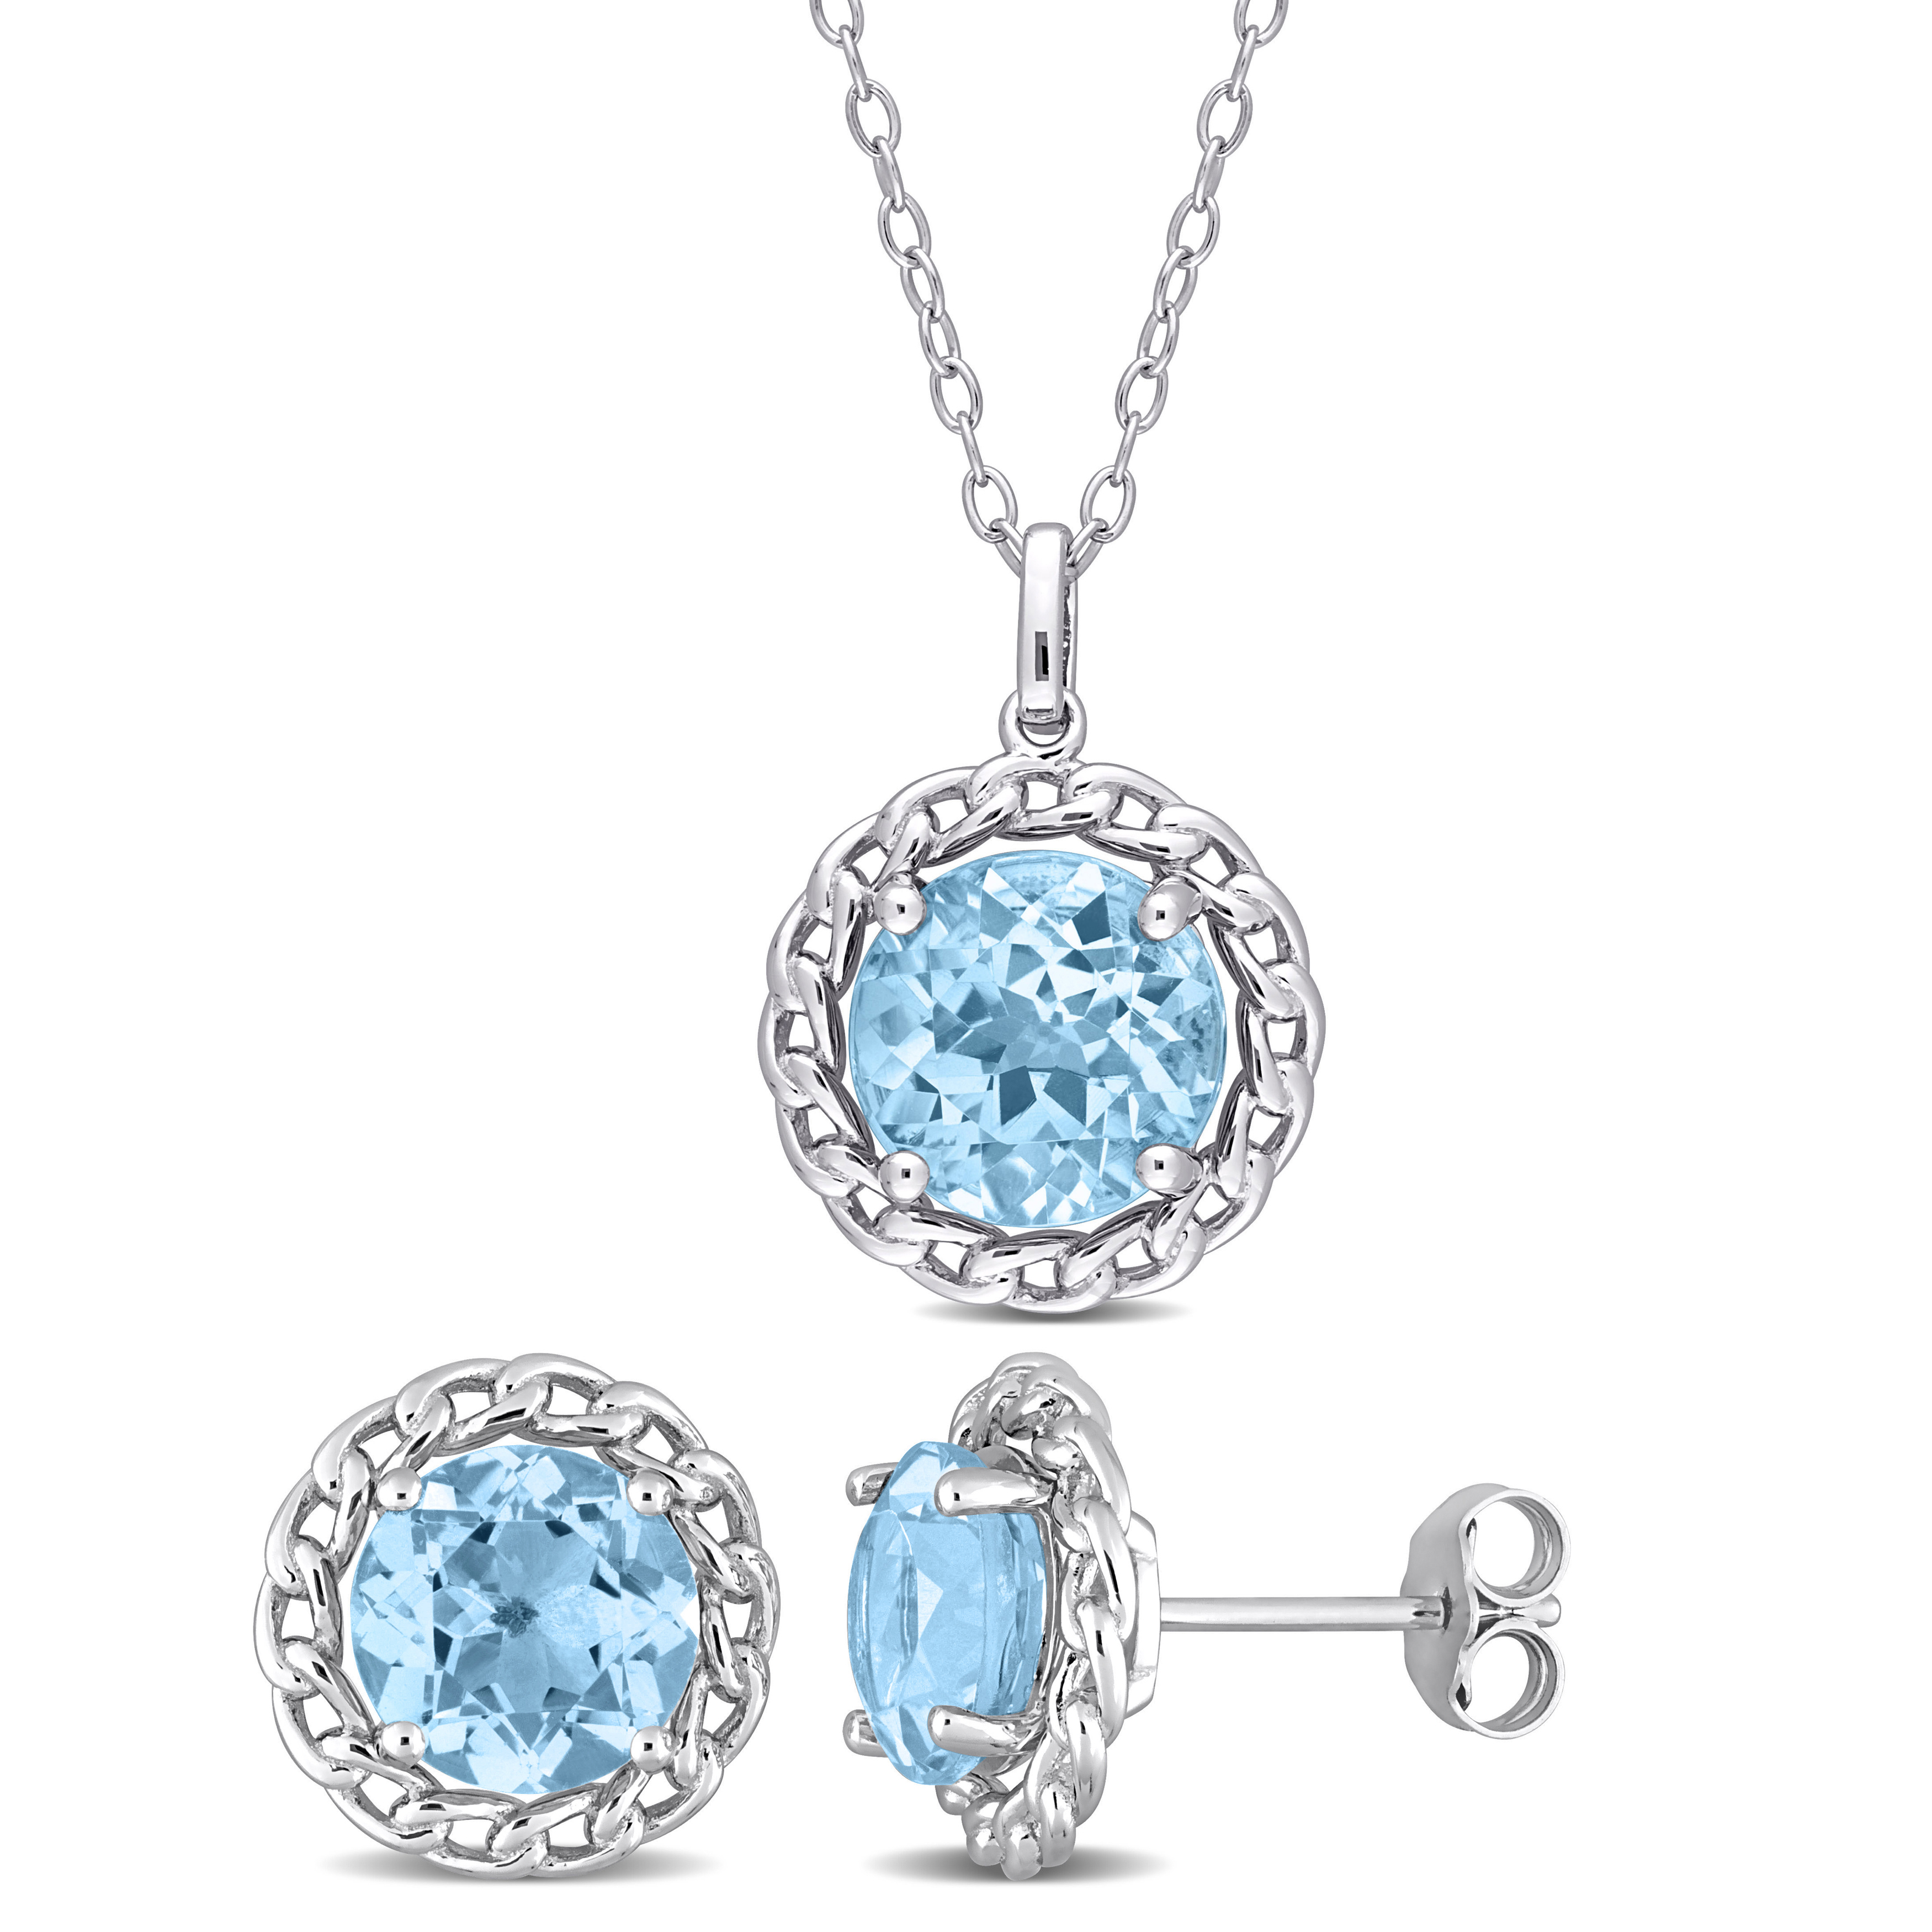 8 1/5 CT TGW Sky-Blue Topaz 2-Piece Solitaire Necklace and Earrings Set in Sterling Silver